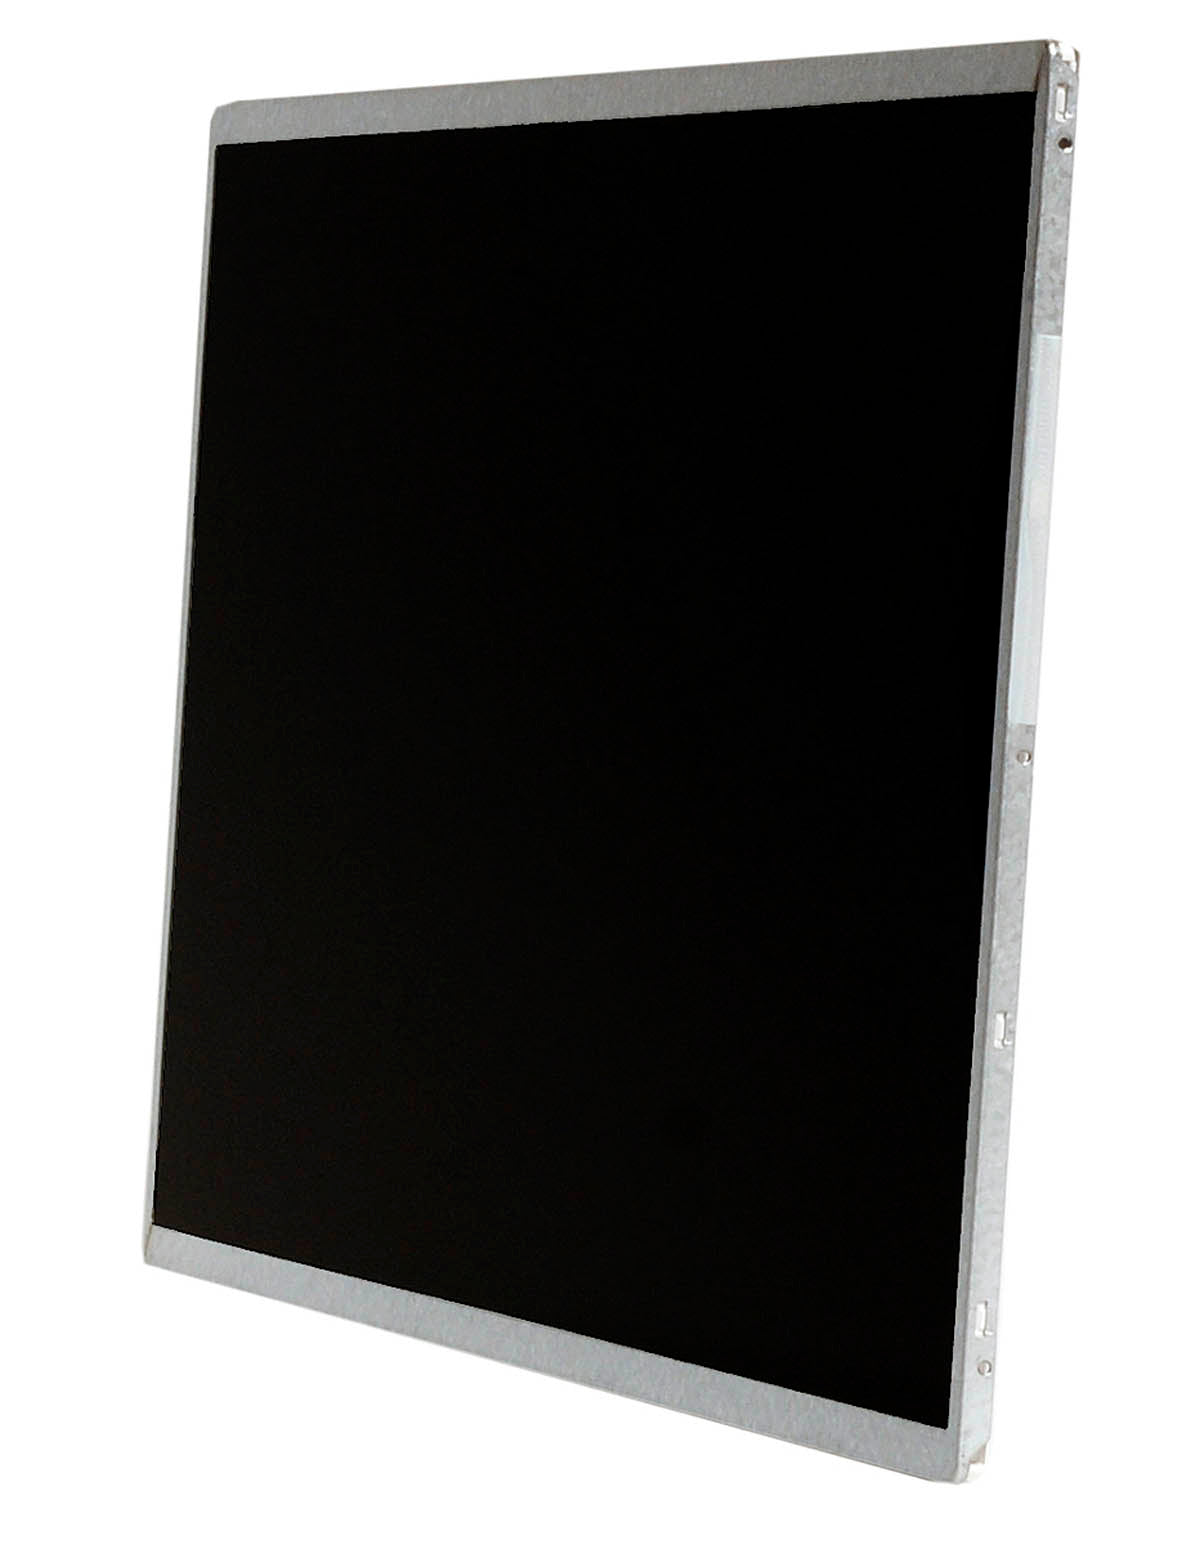 Replacement Screen For LTN140AT06-A01 HD 1366x768 Glossy LCD LED Display